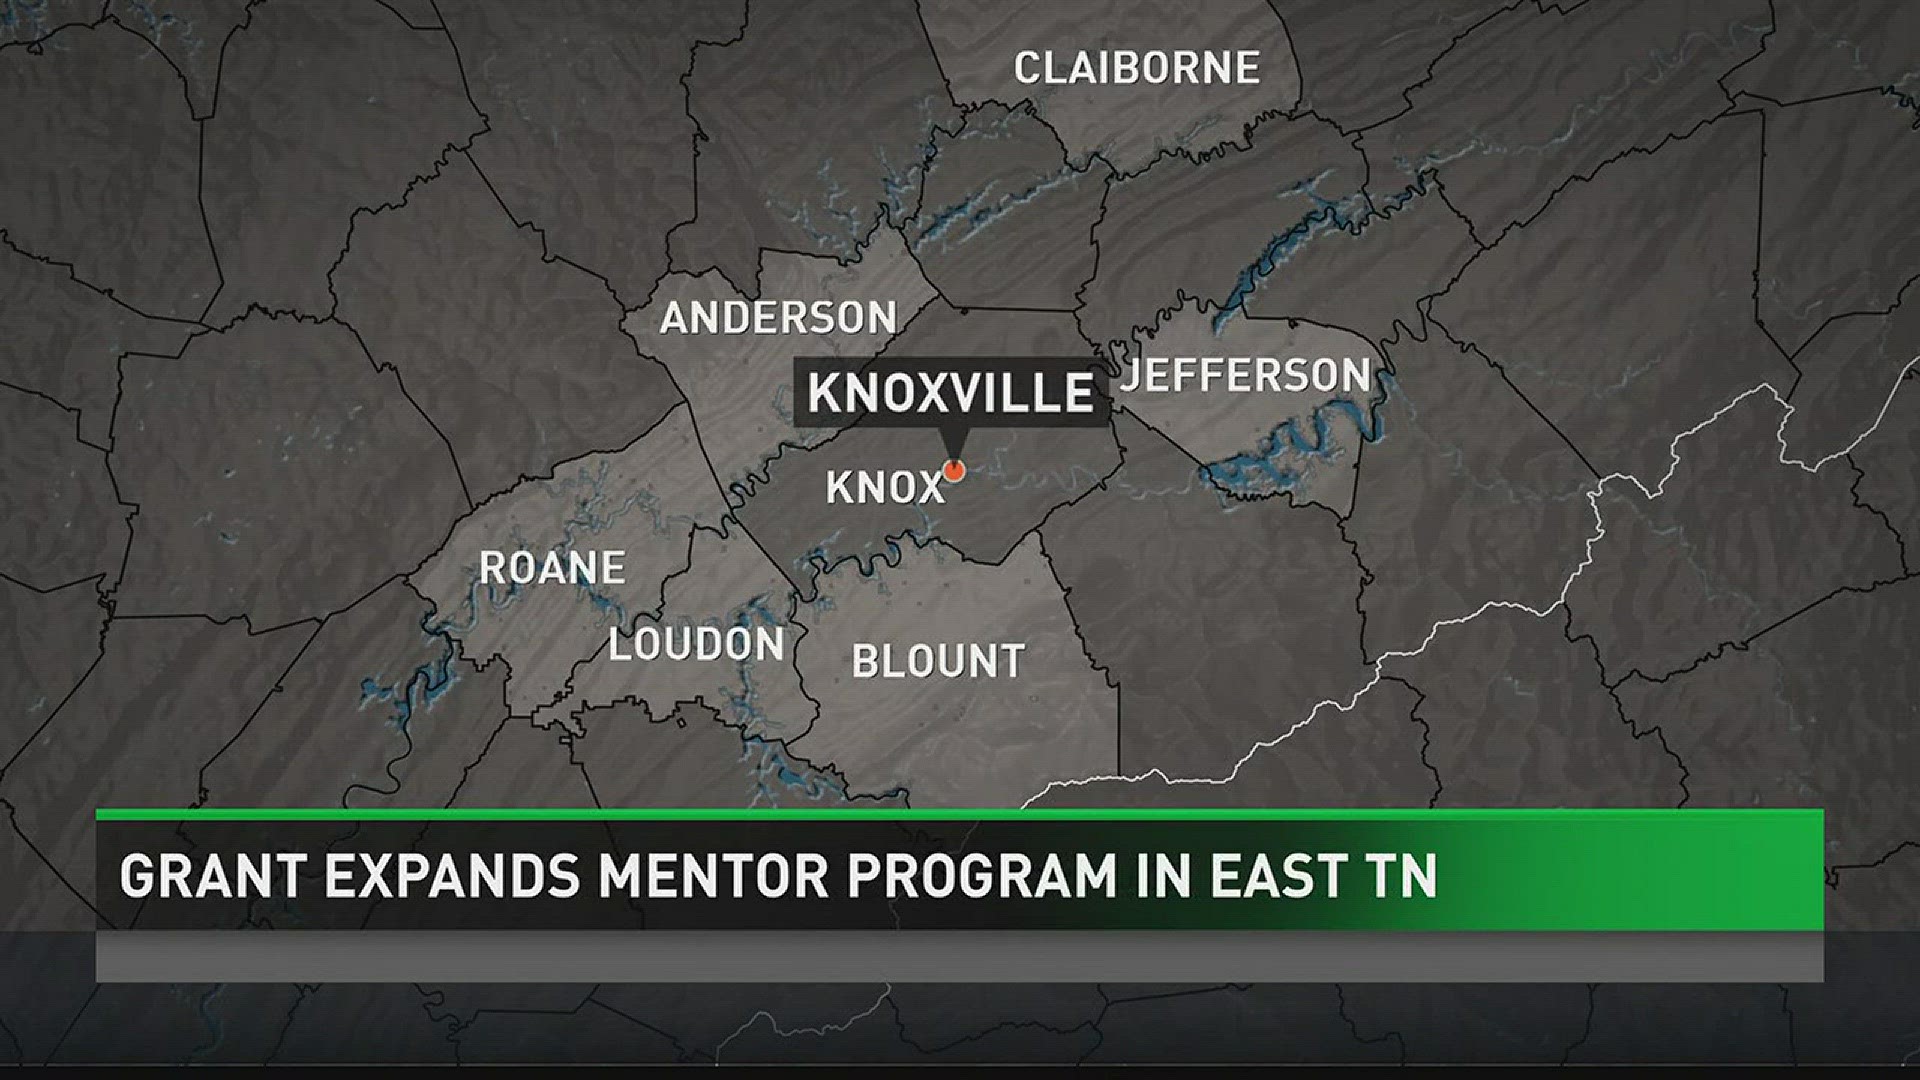 Entrepreneurs in rural East TN areas are receiving some help in starting their businesses. (3/27/17